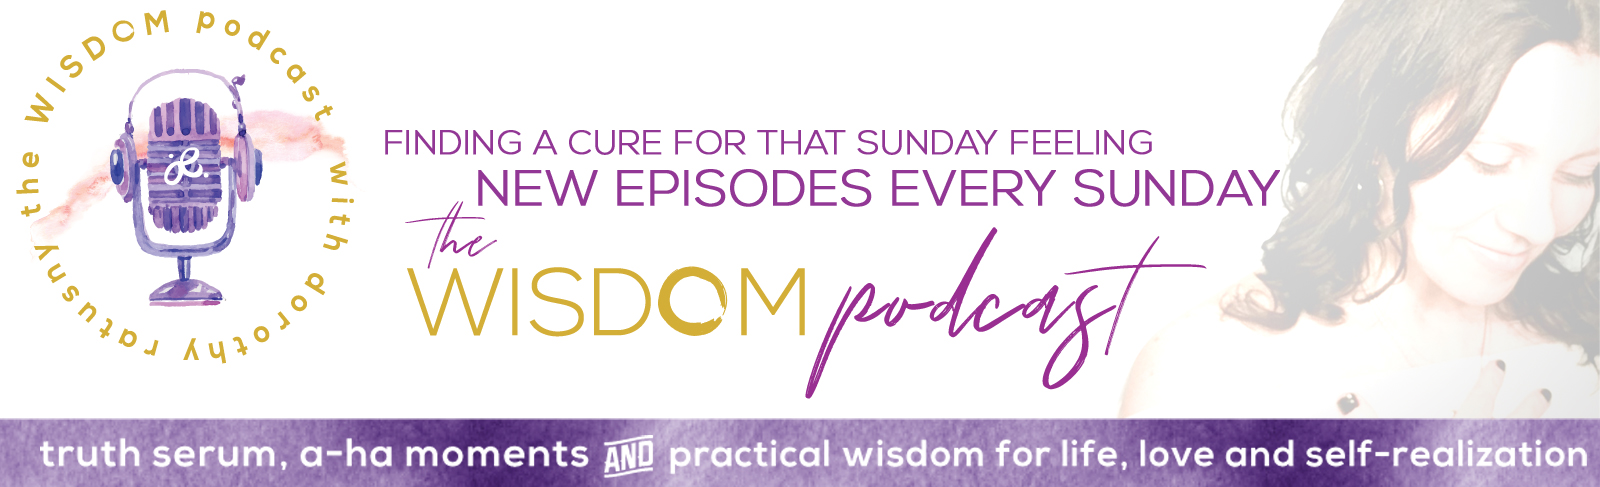 the wisdom podcast with dorothy ratusny | truth serum, a-ha moments and practical wisdom for life, love + self realization